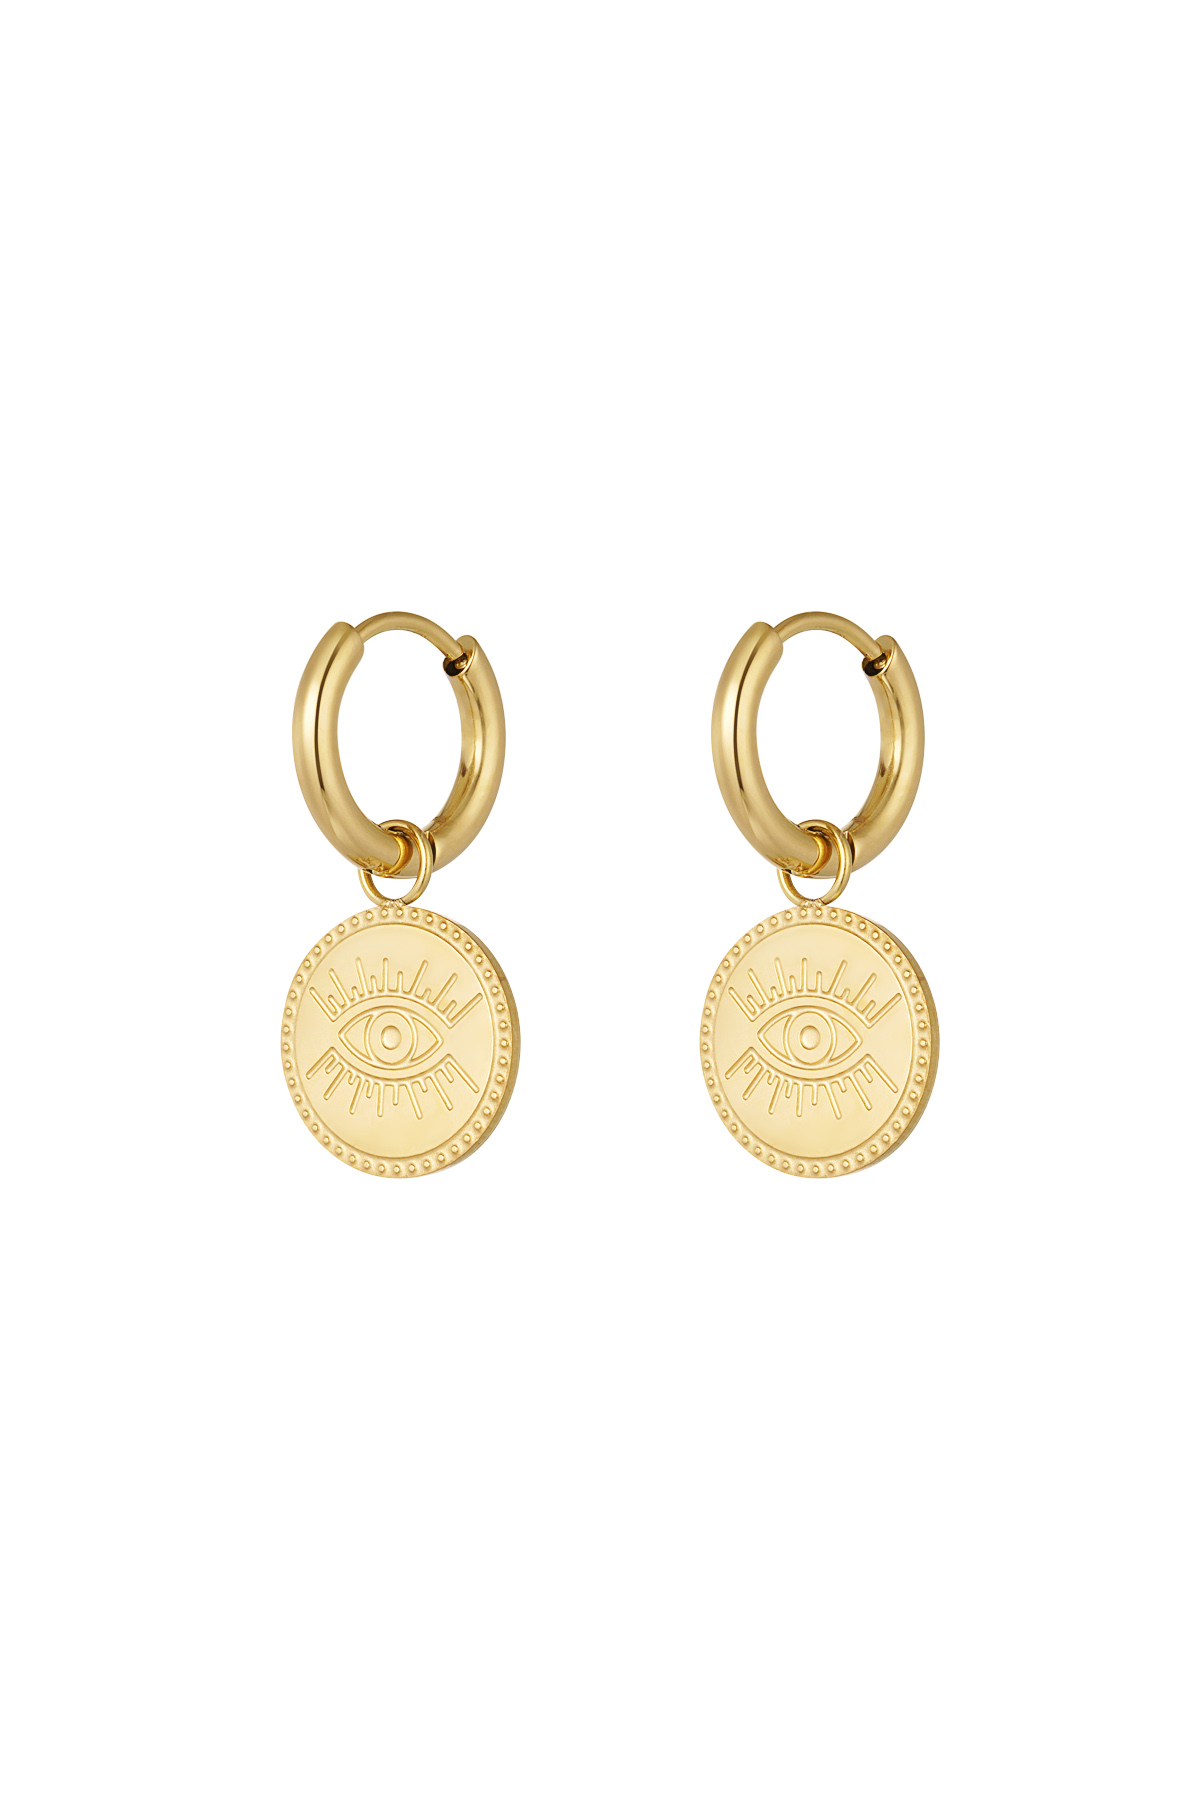 Earrings minimalist round with eye - gold h5 